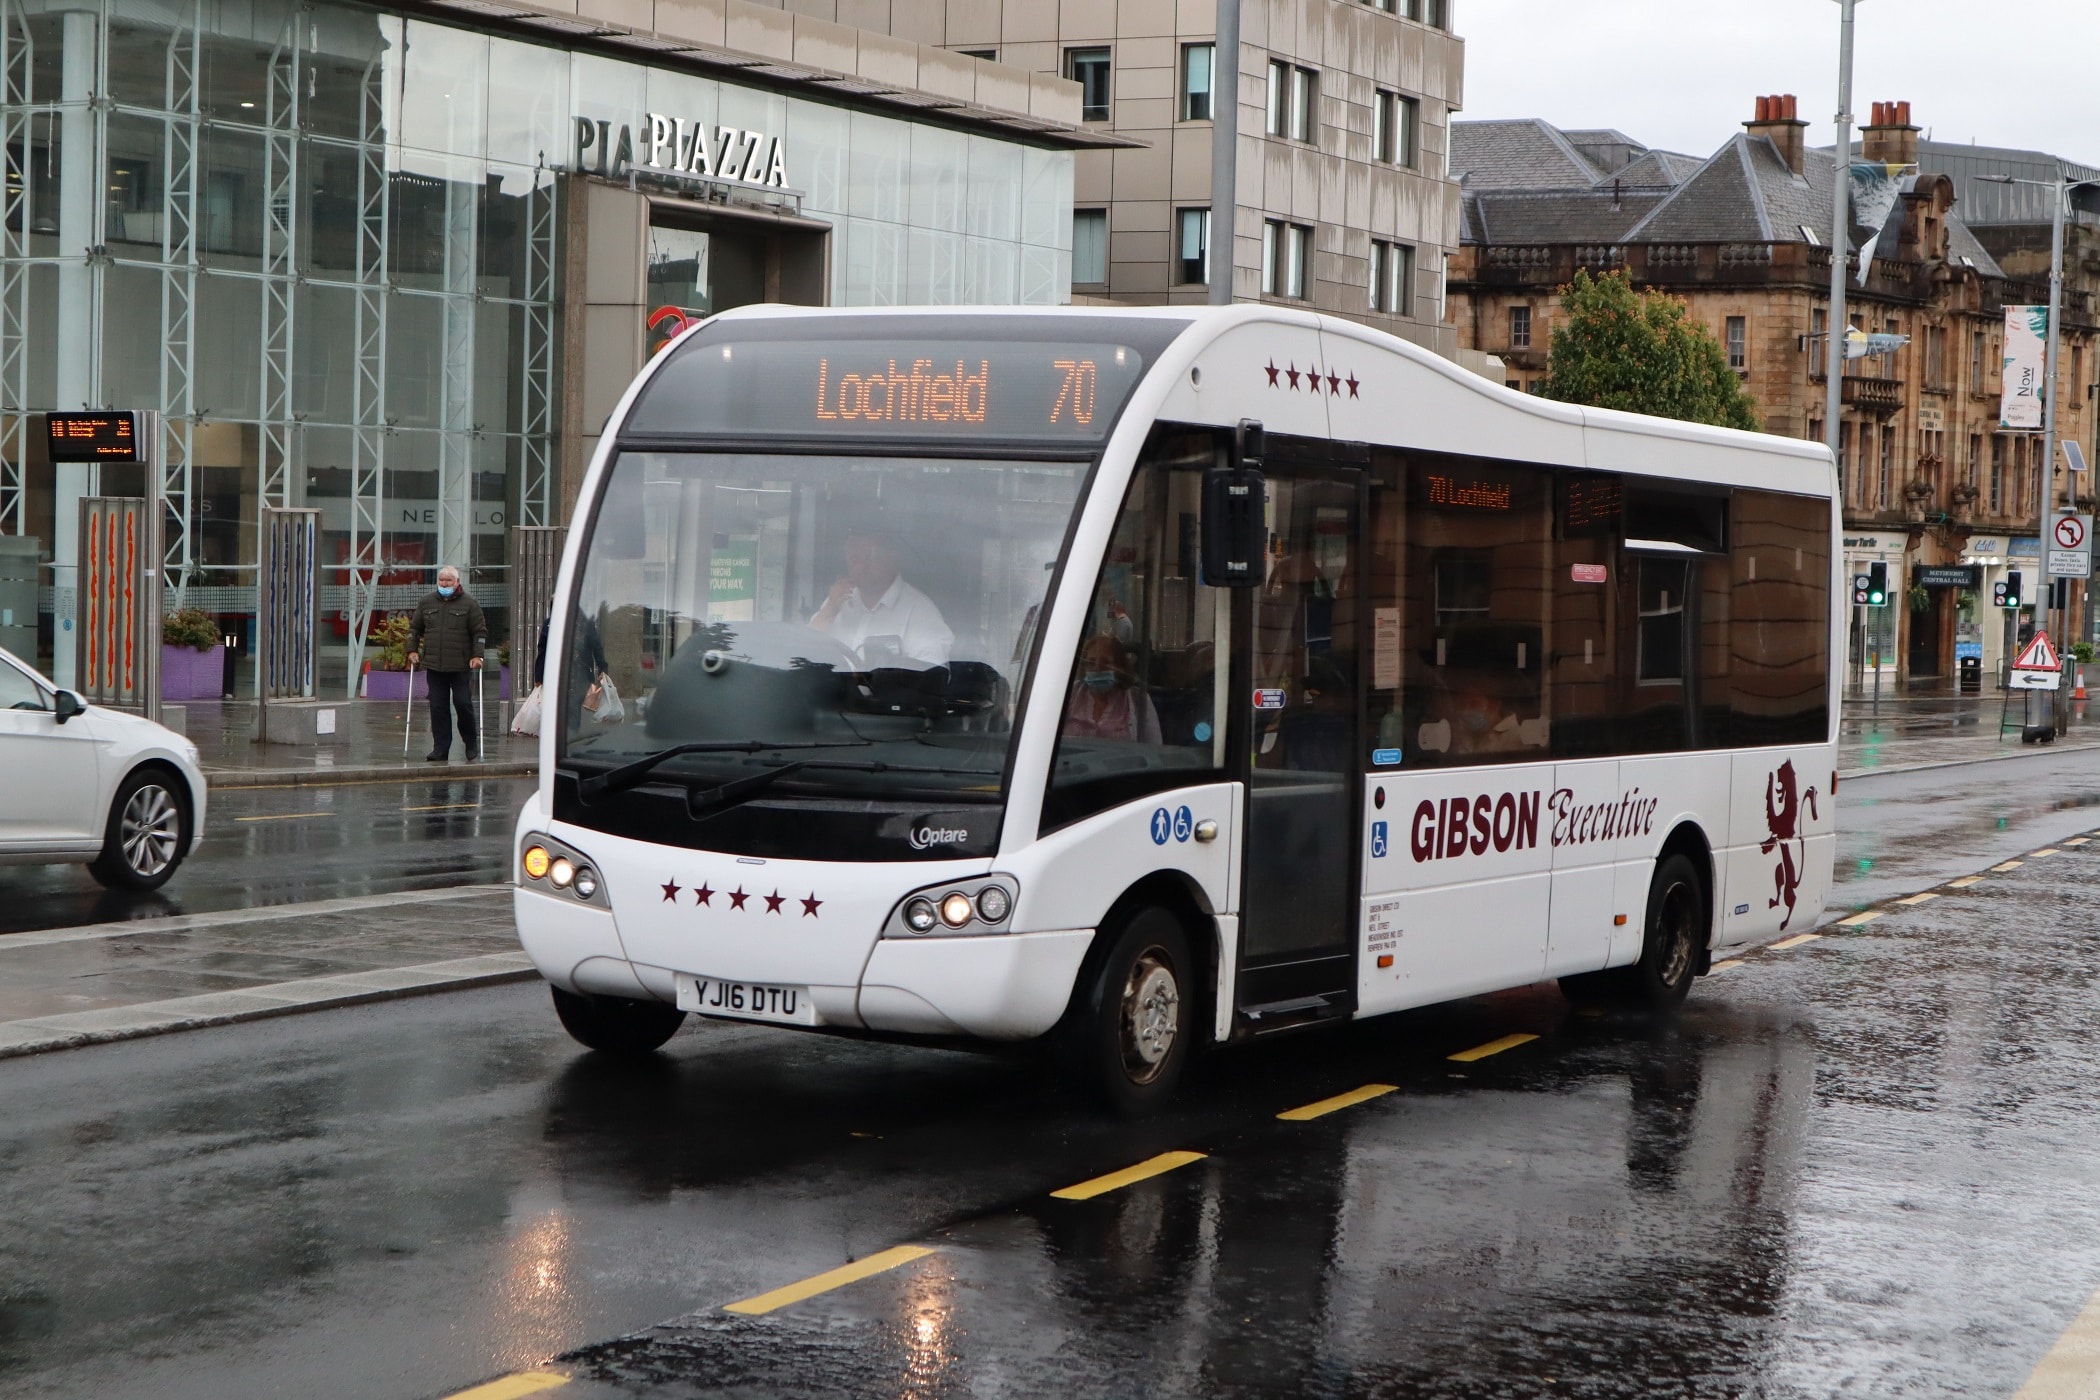 Gibson Direct Optare Solo on route 70